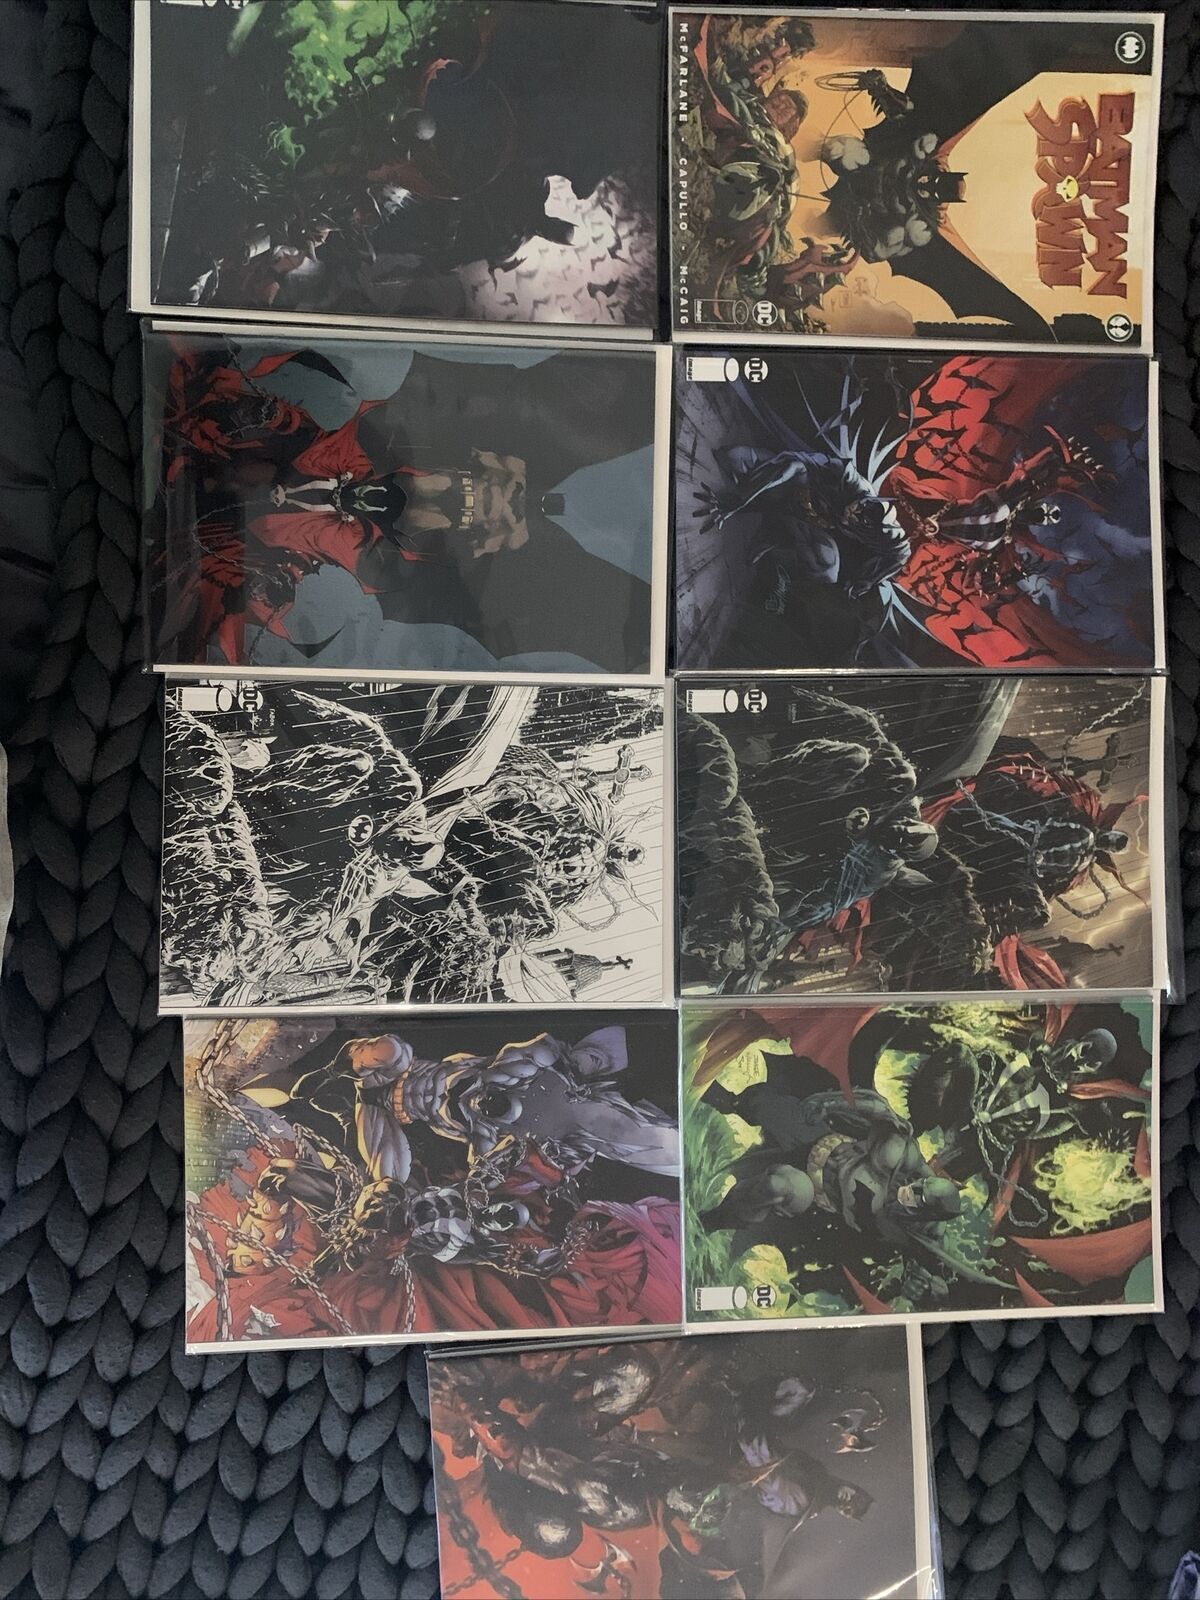 BATMAN SPAWN #1 2022 VARIANT SET OF 9 COVERS INCLUDES 1:25 & 1:50 